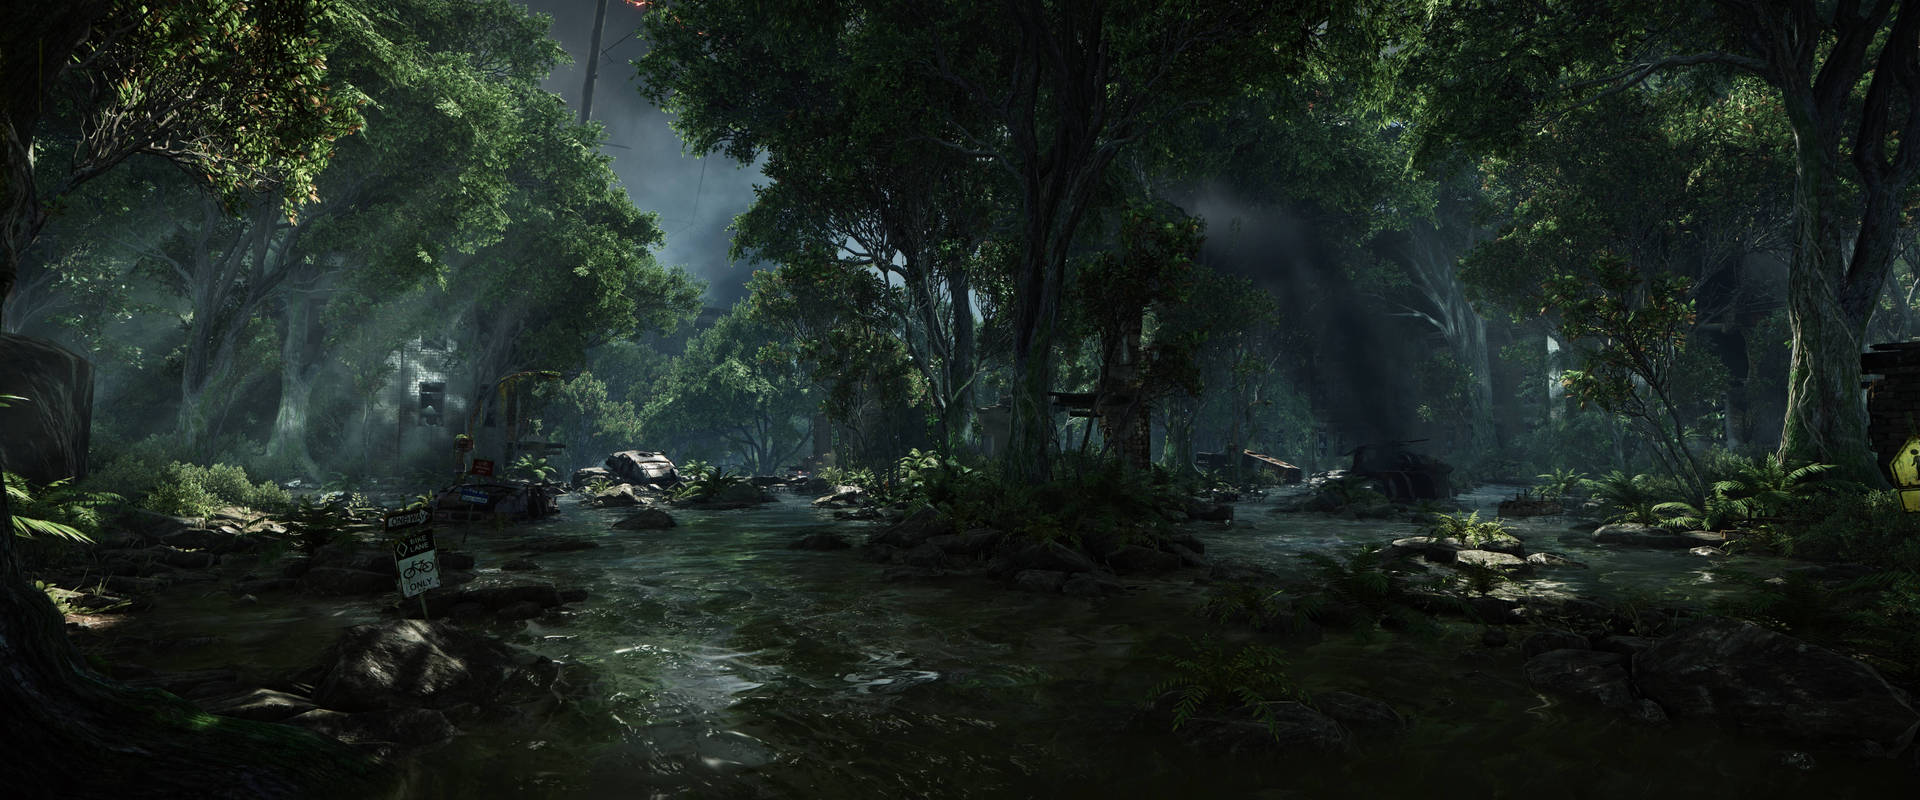 Dual Monitor Crysis Forest Picture